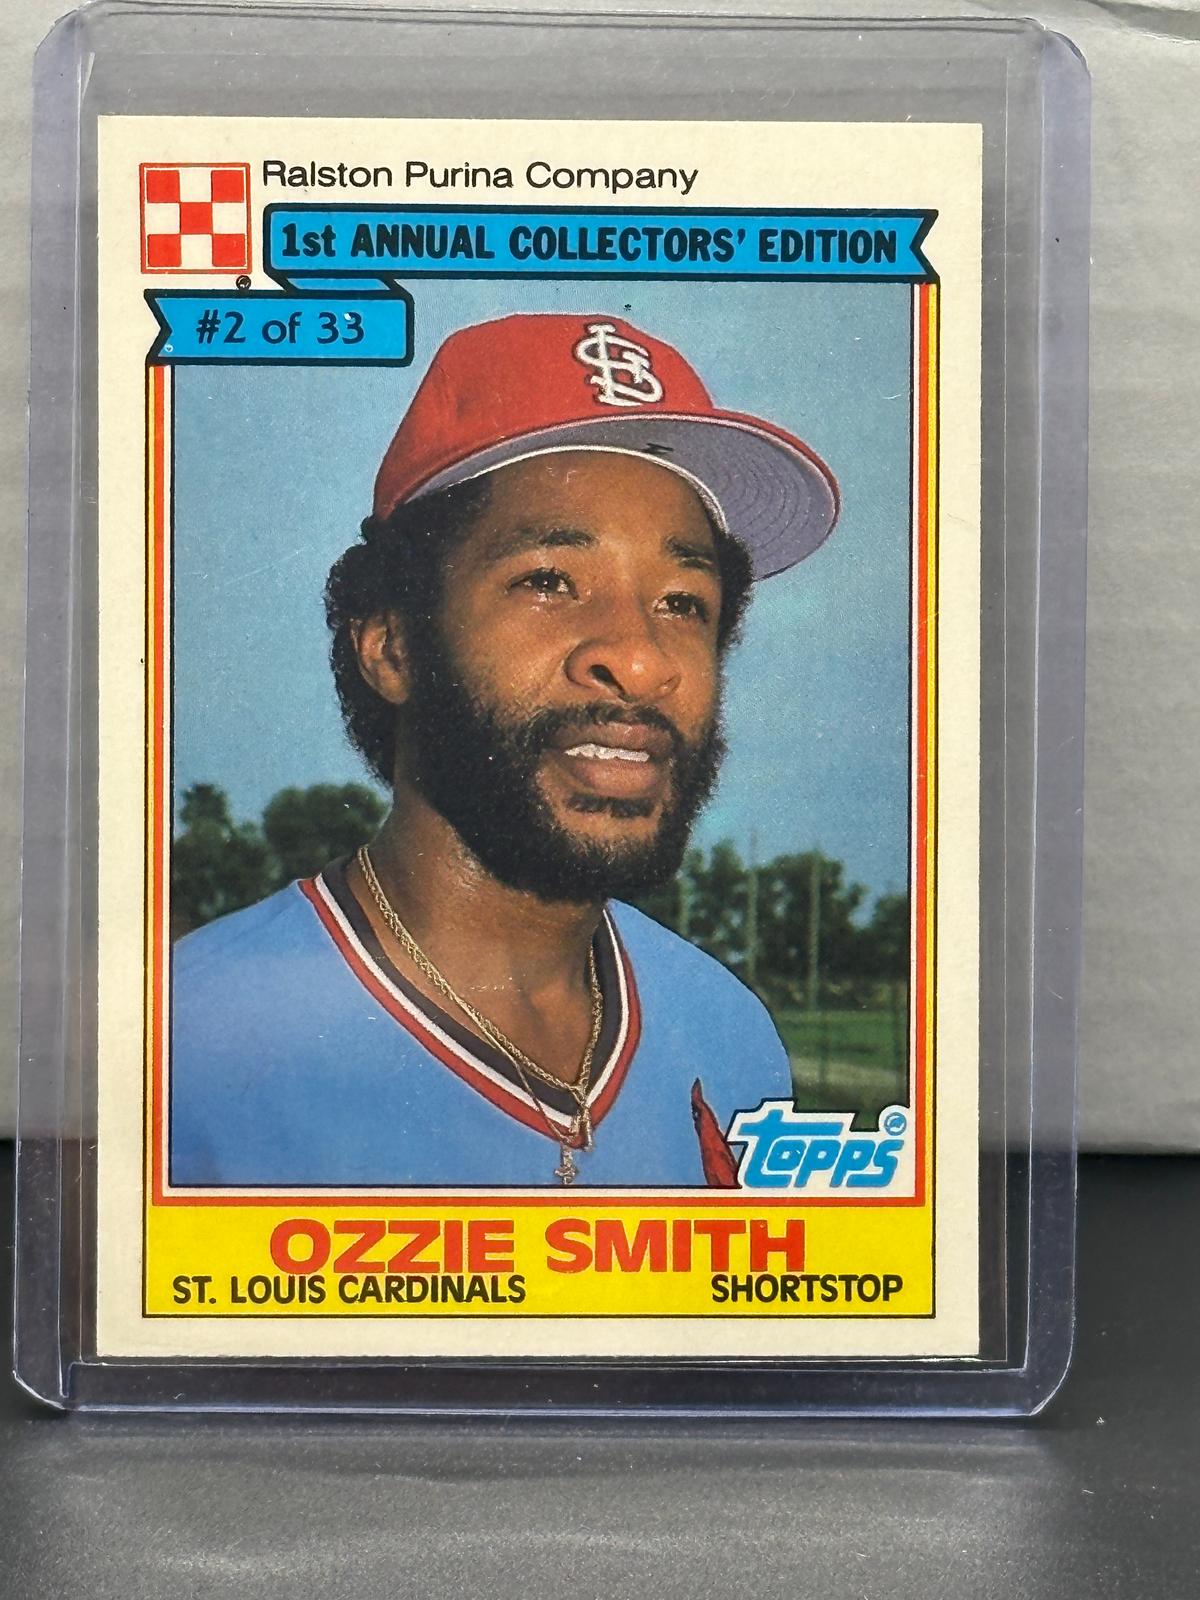 Ozzie Smith 1984 Topps Ralston Purina 1st Annual Collector's Edition #2